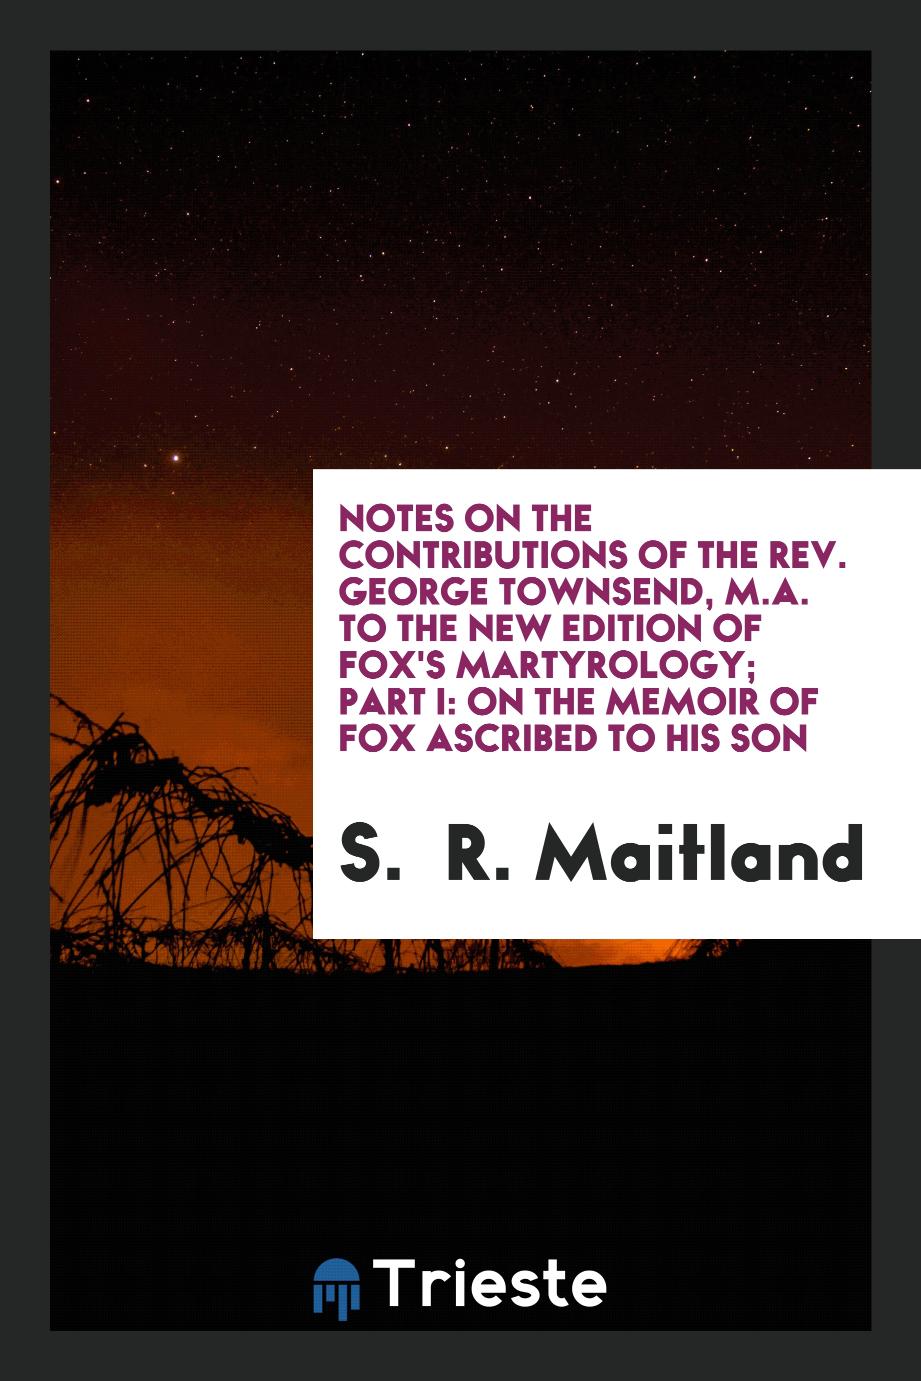 Notes on the contributions of the Rev. George Townsend, M.A. to the new edition of Fox's Martyrology; Part I: on the memoir of Fox ascribed to his son